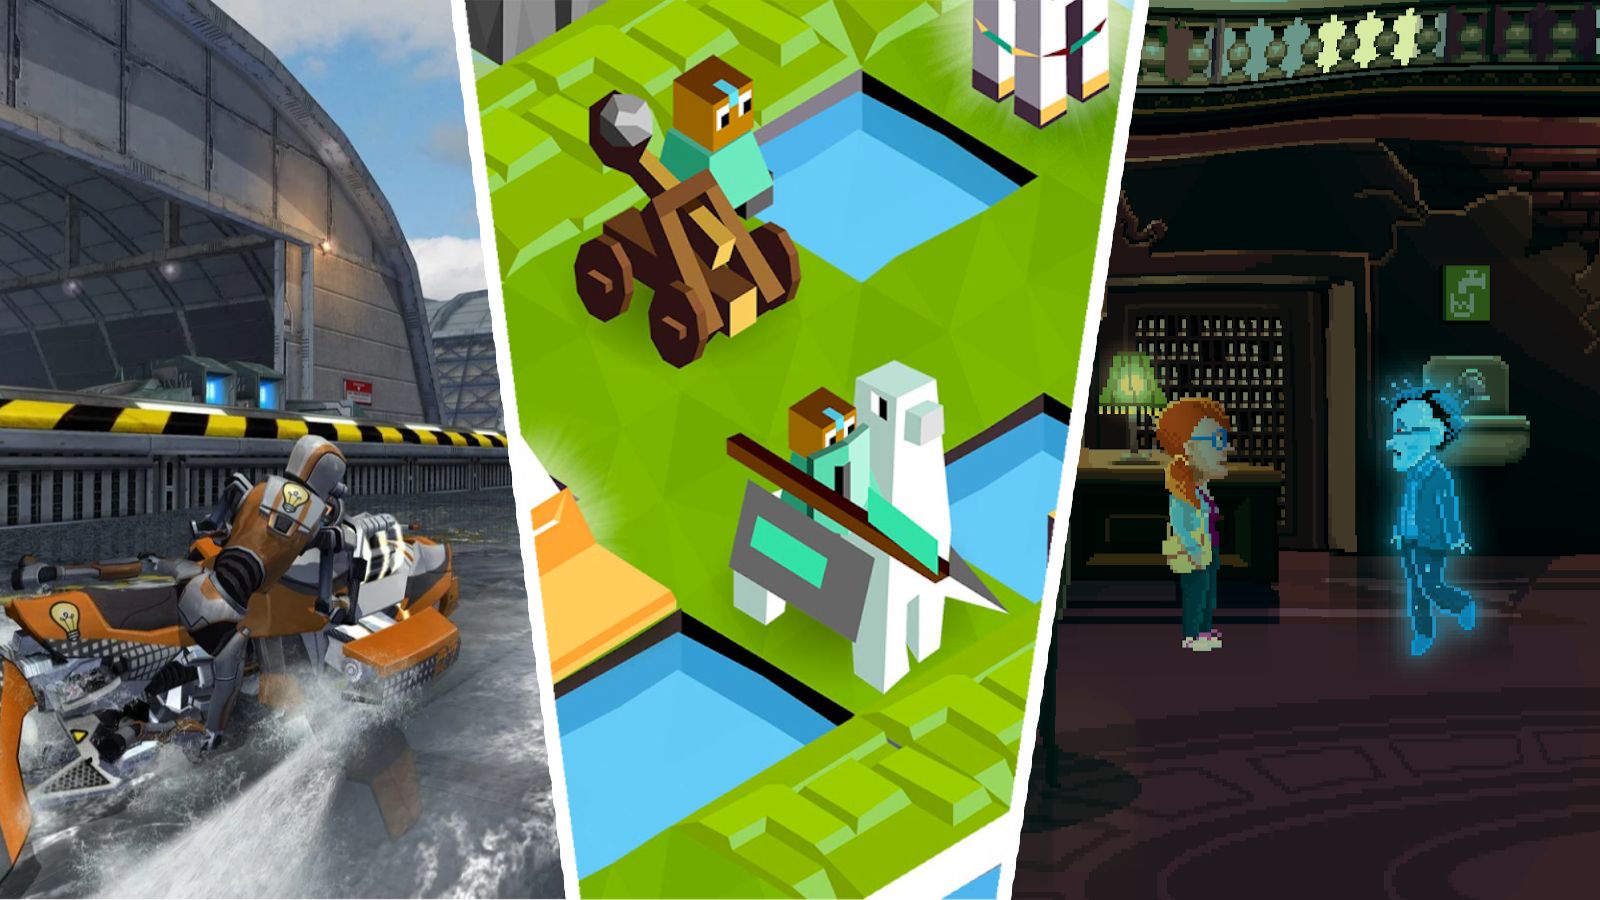 The best games on Google Play Pass